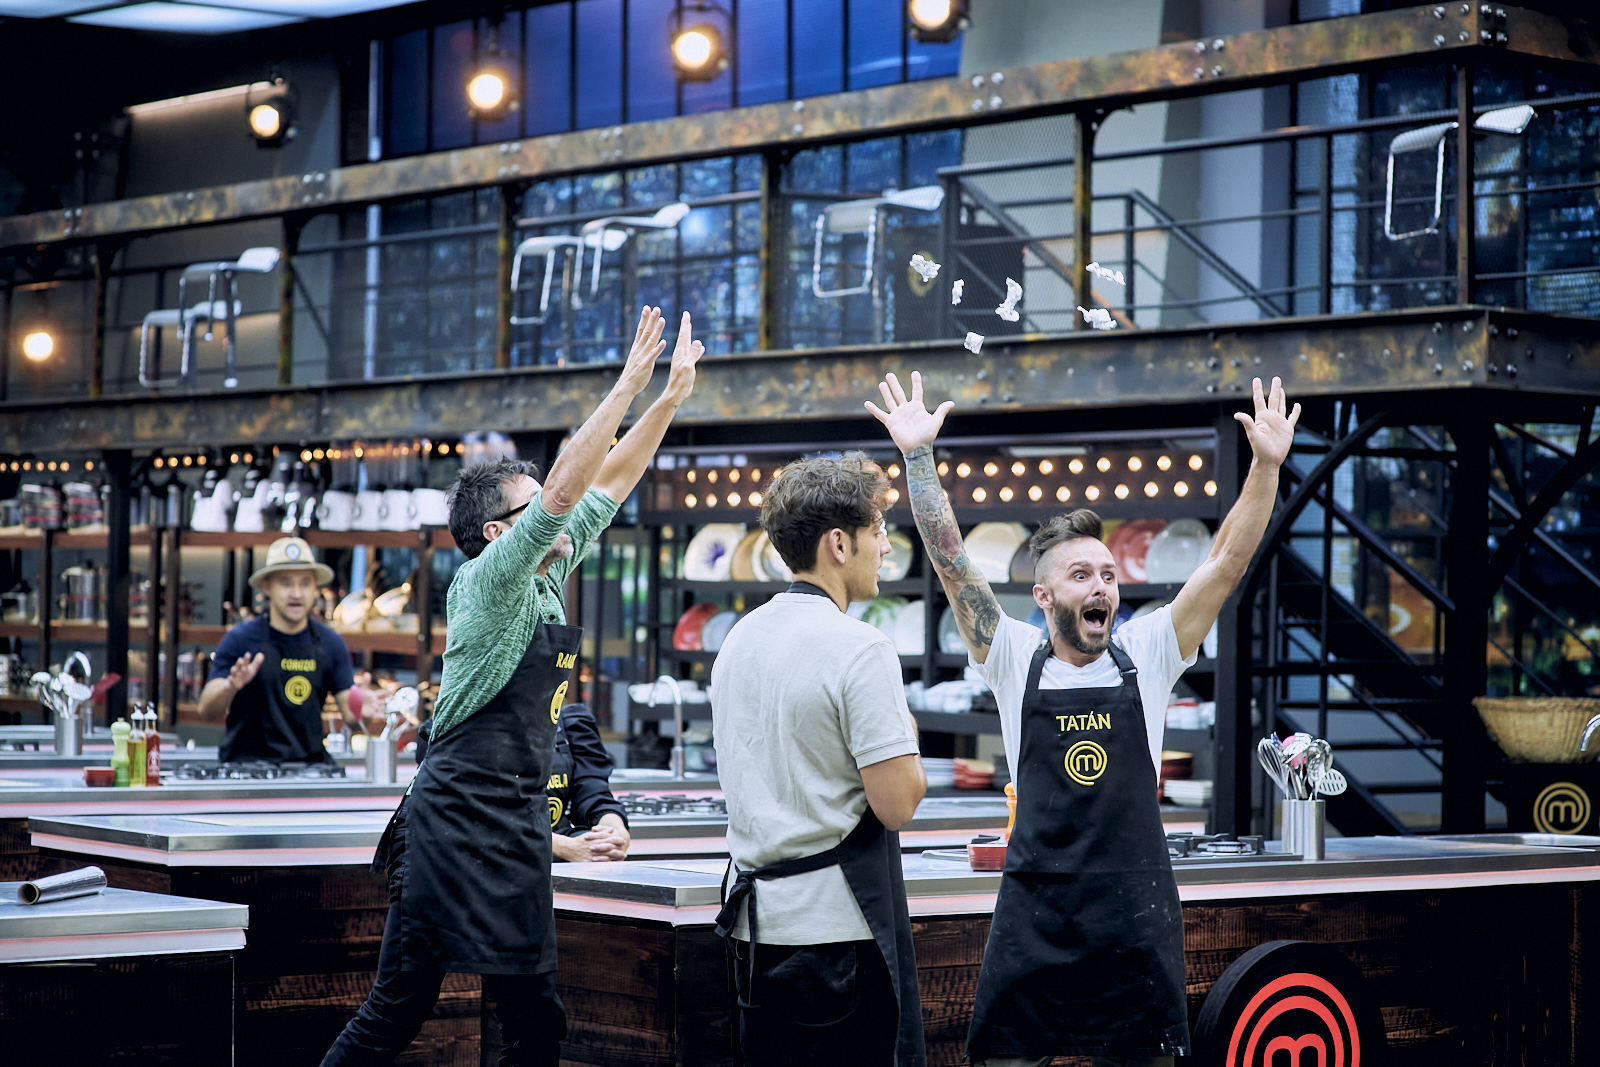 Tatán Mejía is consolidated as one of the favorites of MasterChef Celebrity